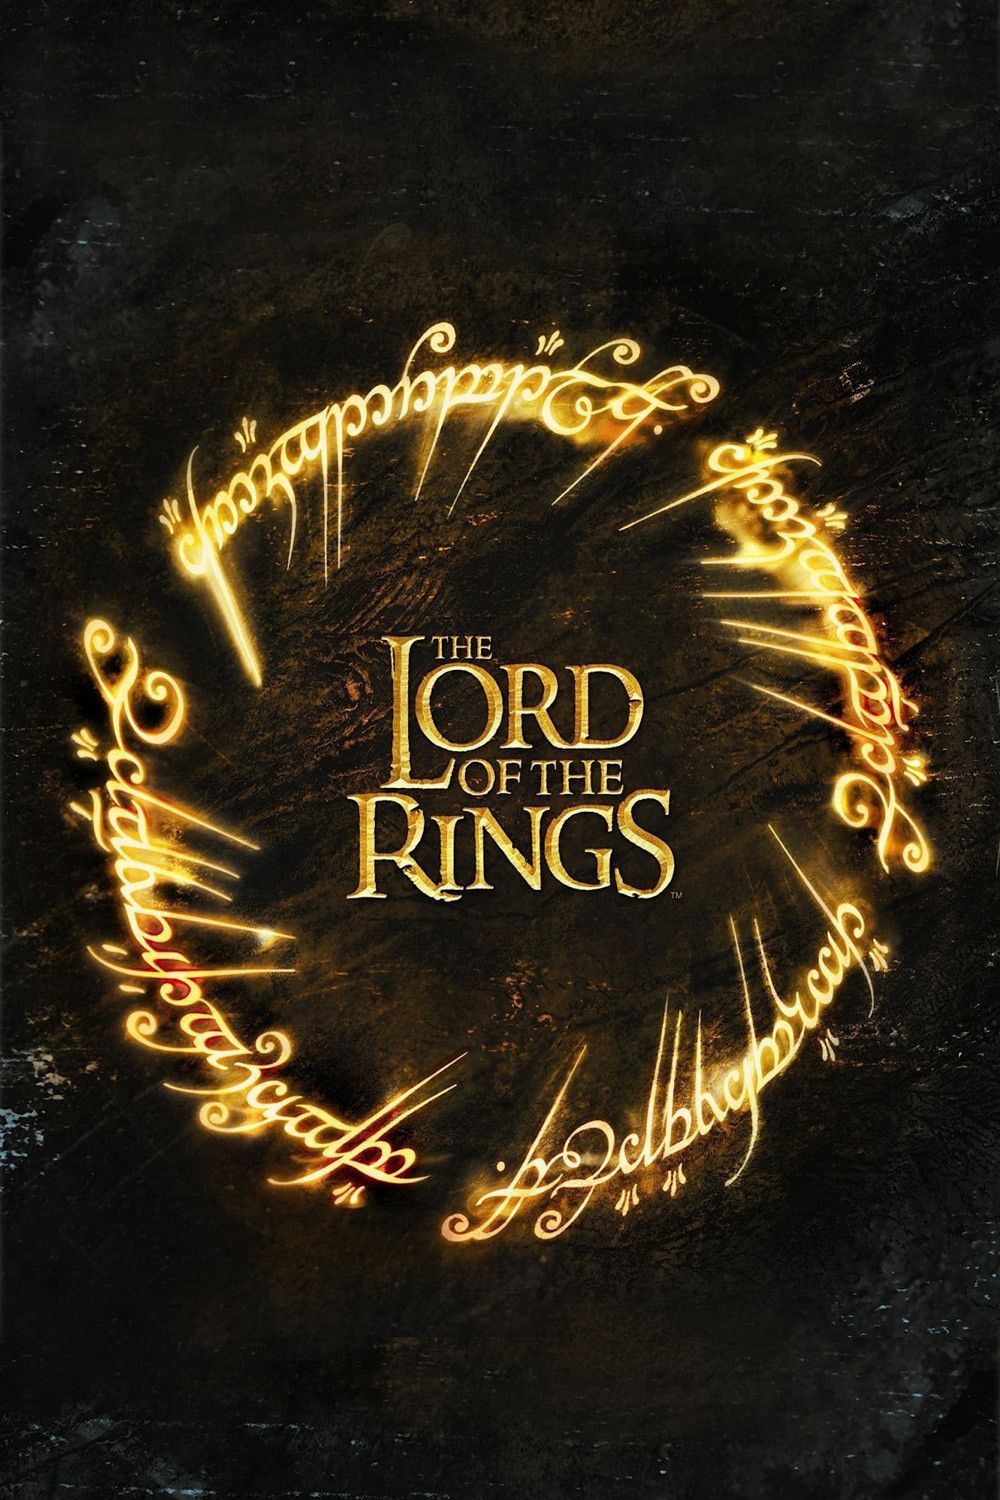 The Lord of the Rings Franchise Poster with Gold Words Resembling a Ring